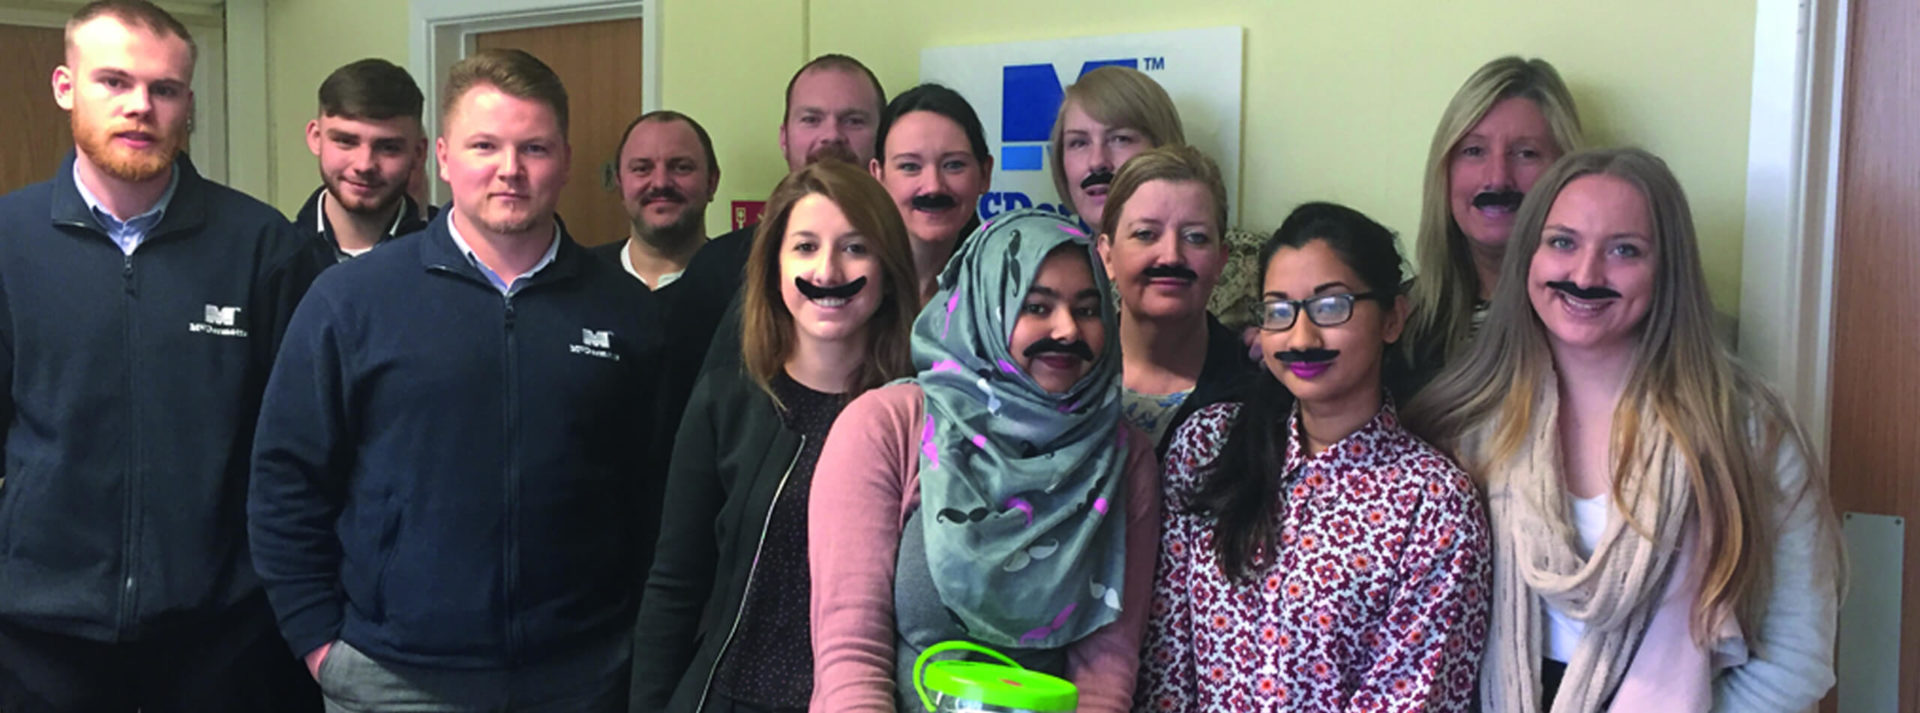 Well done to our Movember team for raising £2,084 for charity while sporting some very impressive moustaches!